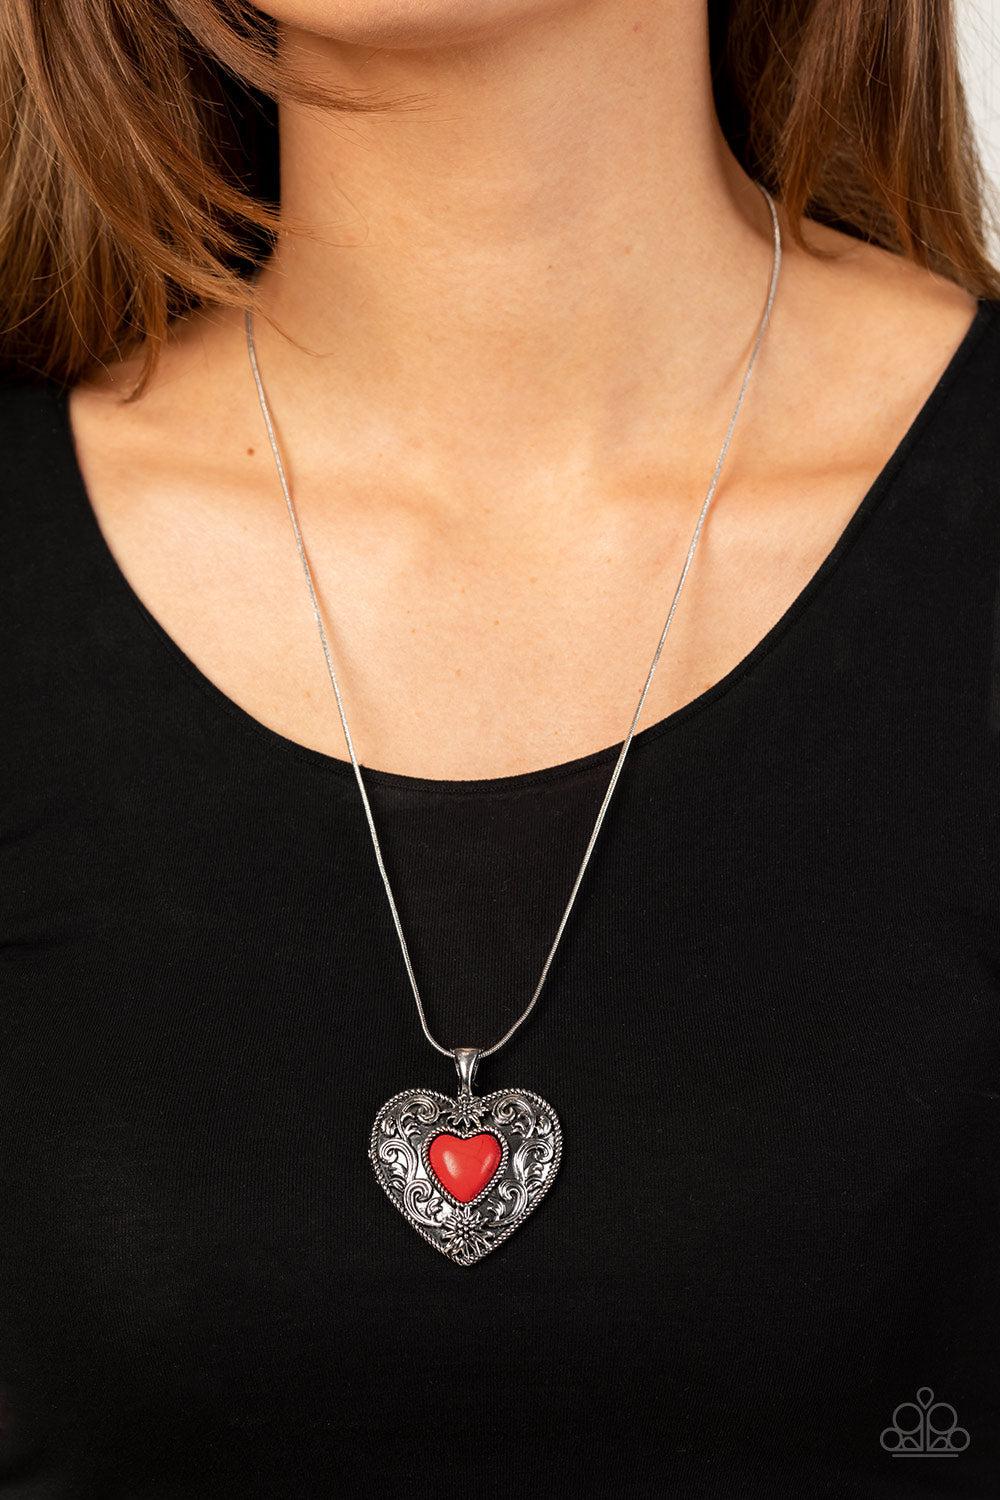 Wholeheartedly Whimsical Red Stone Heart Necklace - Paparazzi Accessories-on model - CarasShop.com - $5 Jewelry by Cara Jewels